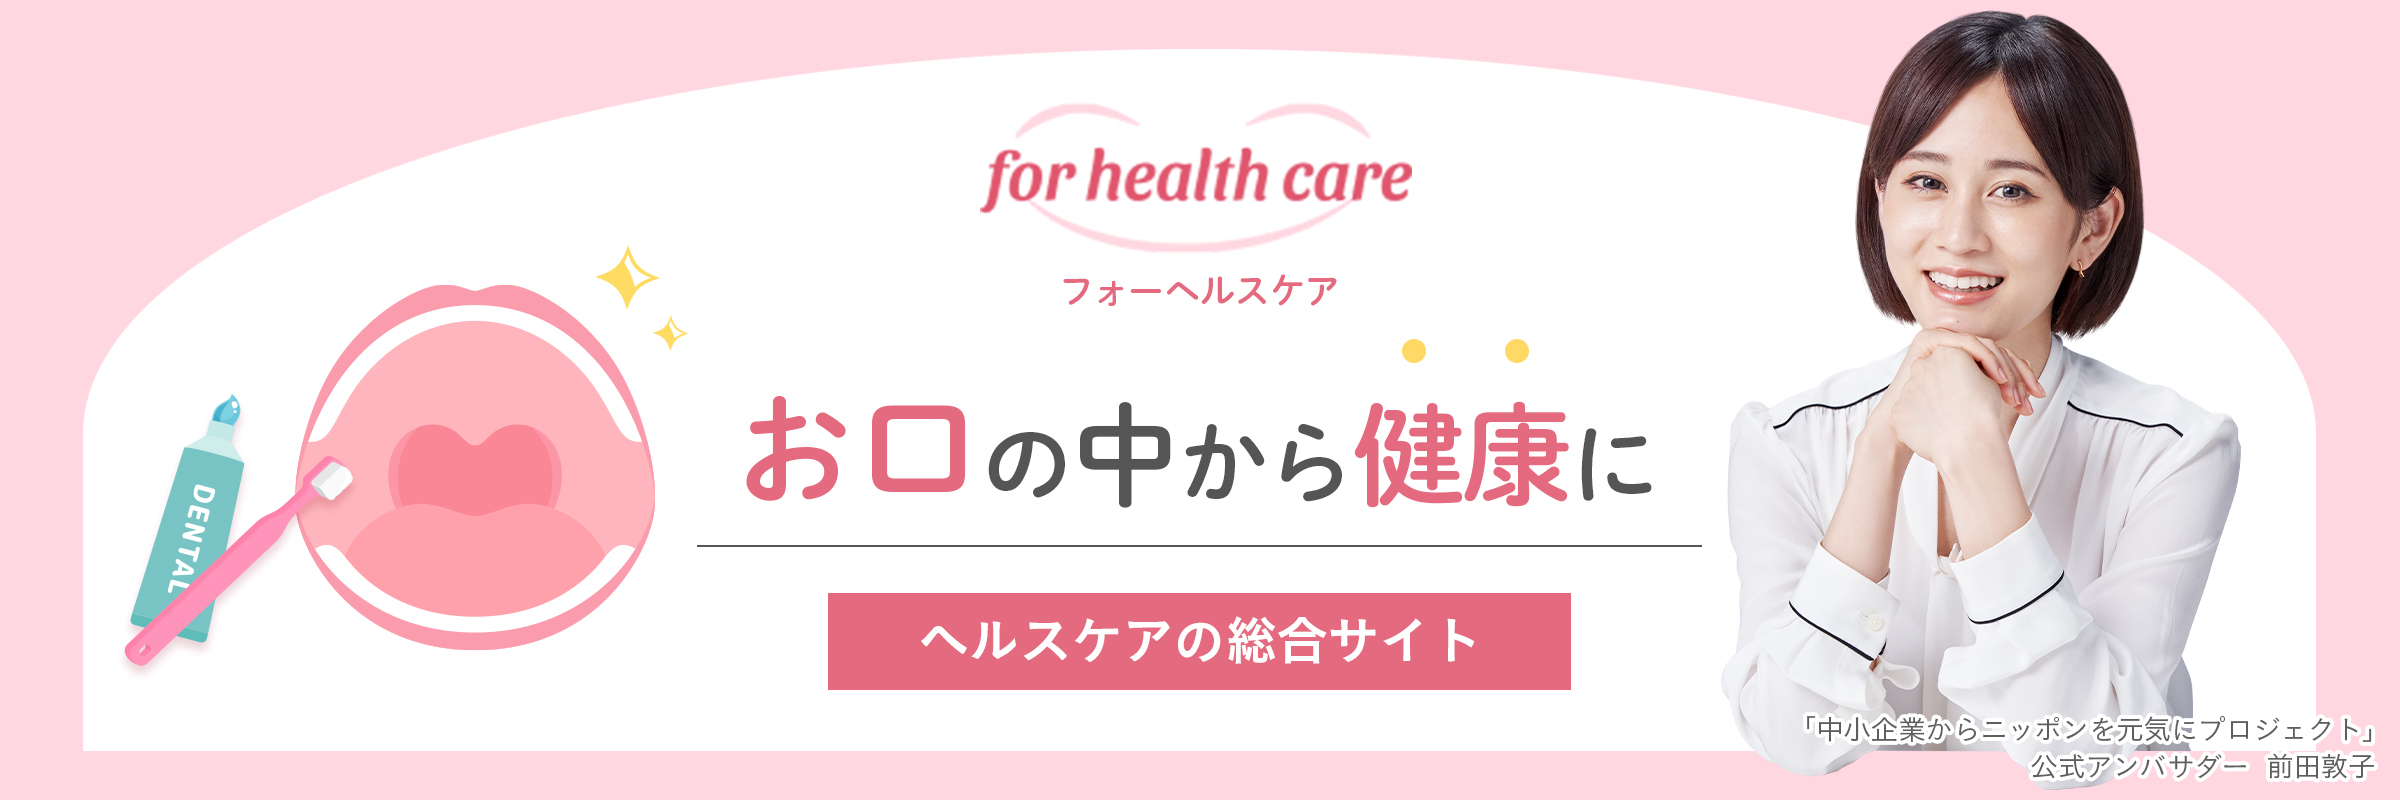 for health care（フォーヘルスケア）